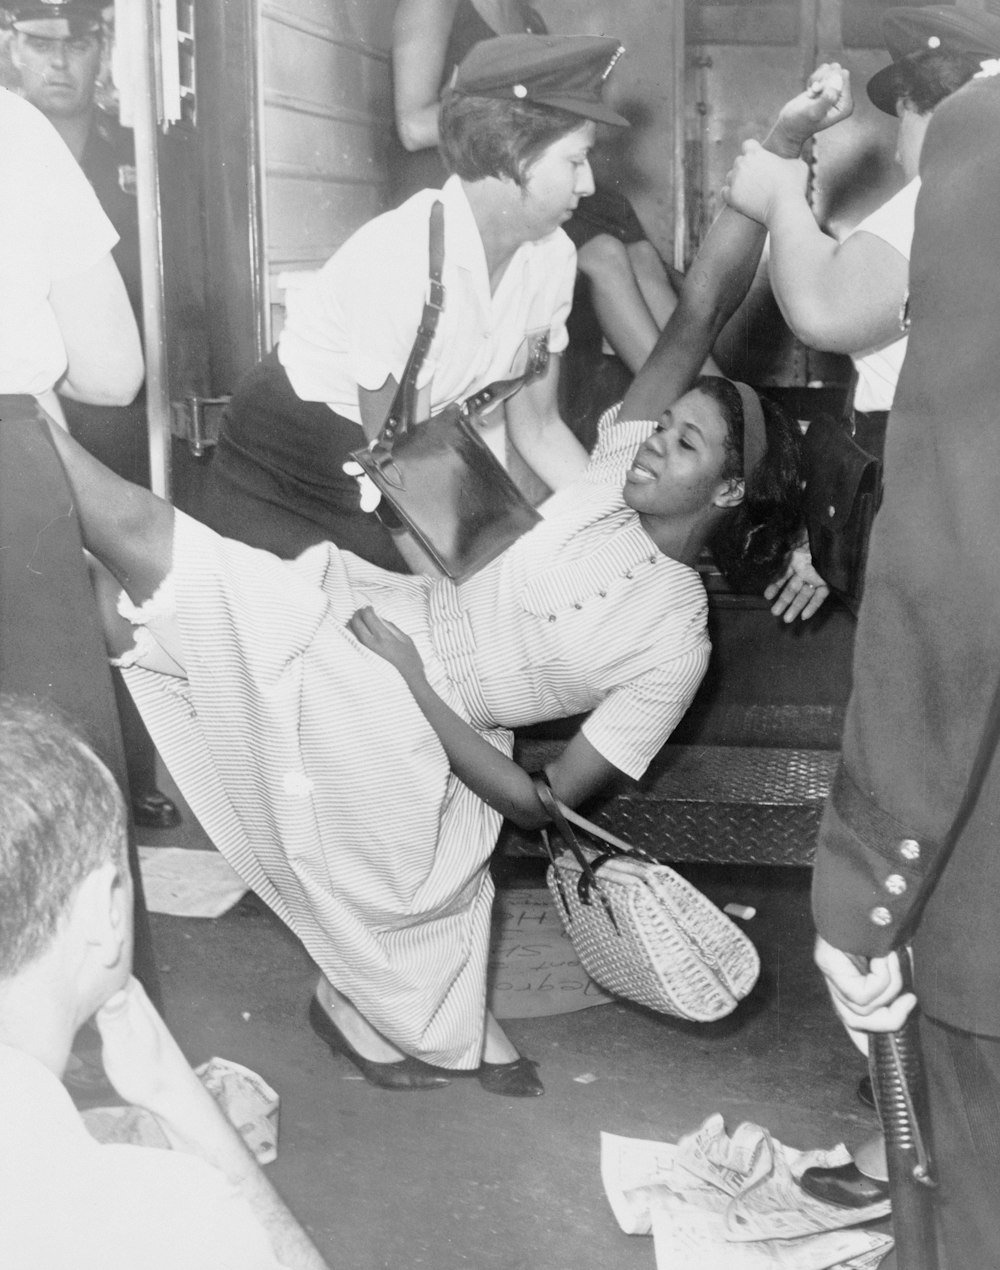 African American woman, Juanita Sealy, being carried to police patrol wagon during demonstration in Brooklyn, New York.